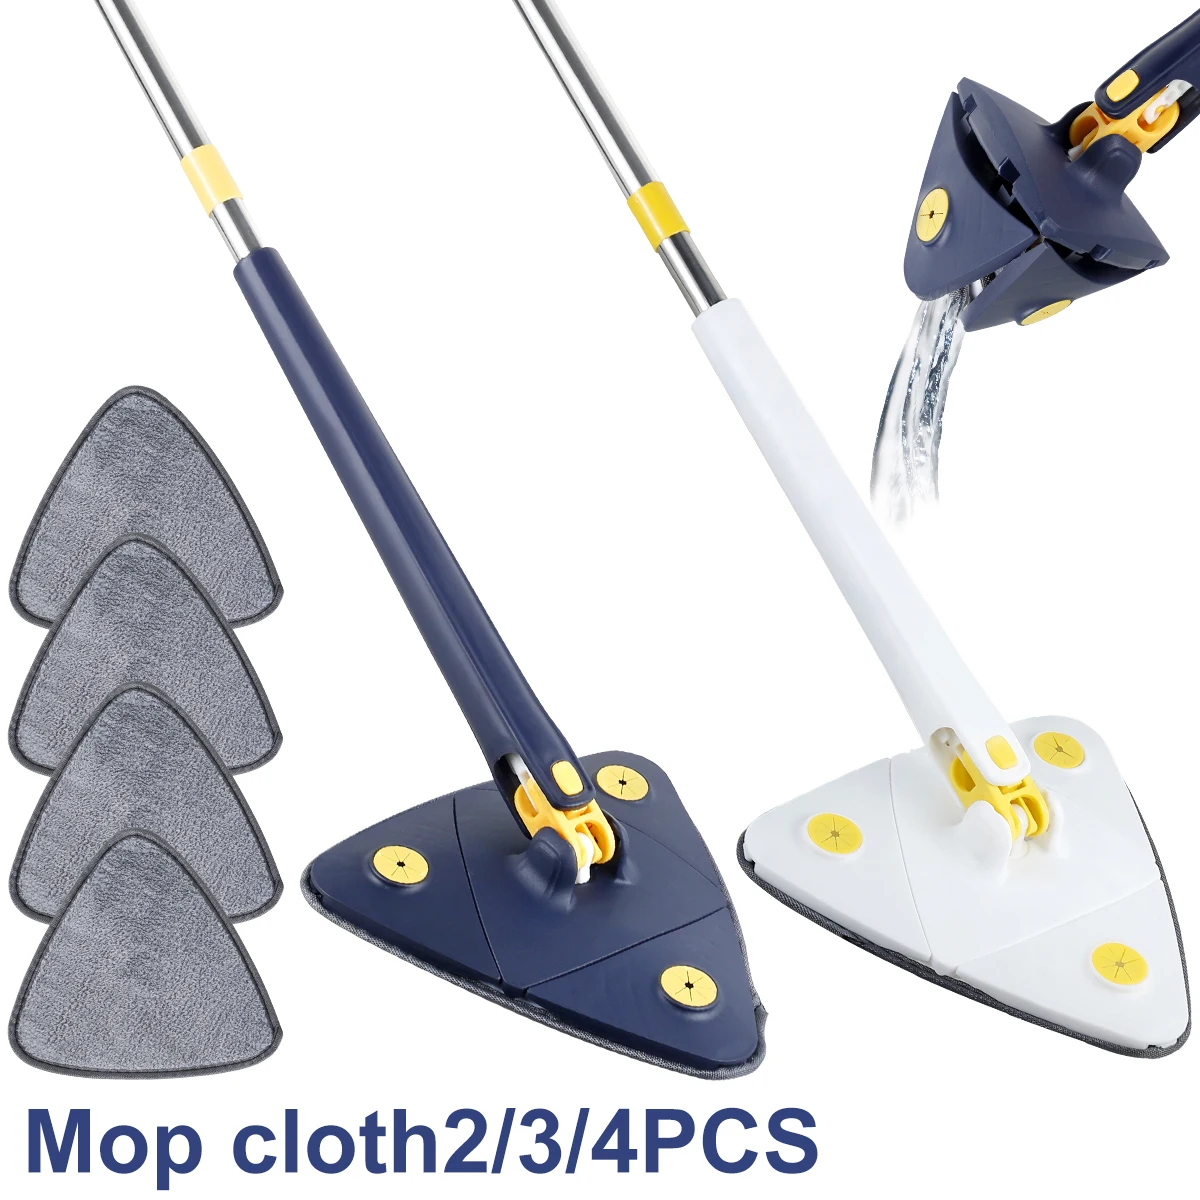 Triangle Mop 360° Rotatable Squeeze Mop Free Hands Floor Cleaning Wet&Dry Mop 130cm For Home Ceiling/Corner Windows Clean Tools